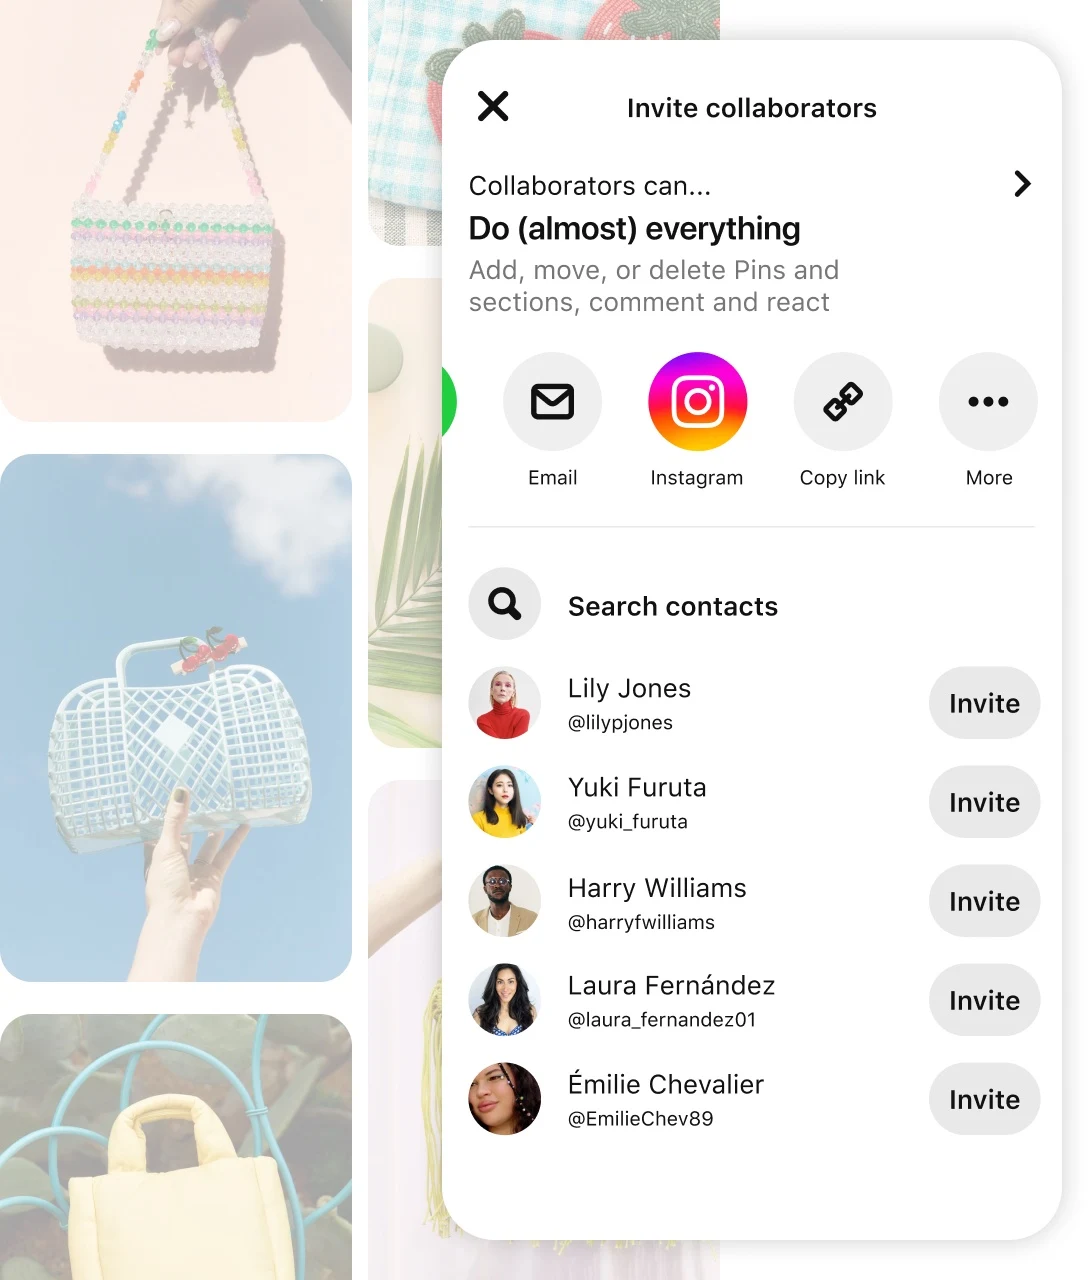 Faded pin grid including various purses with screen of Pinterest app prompt to "Invite collaborators"